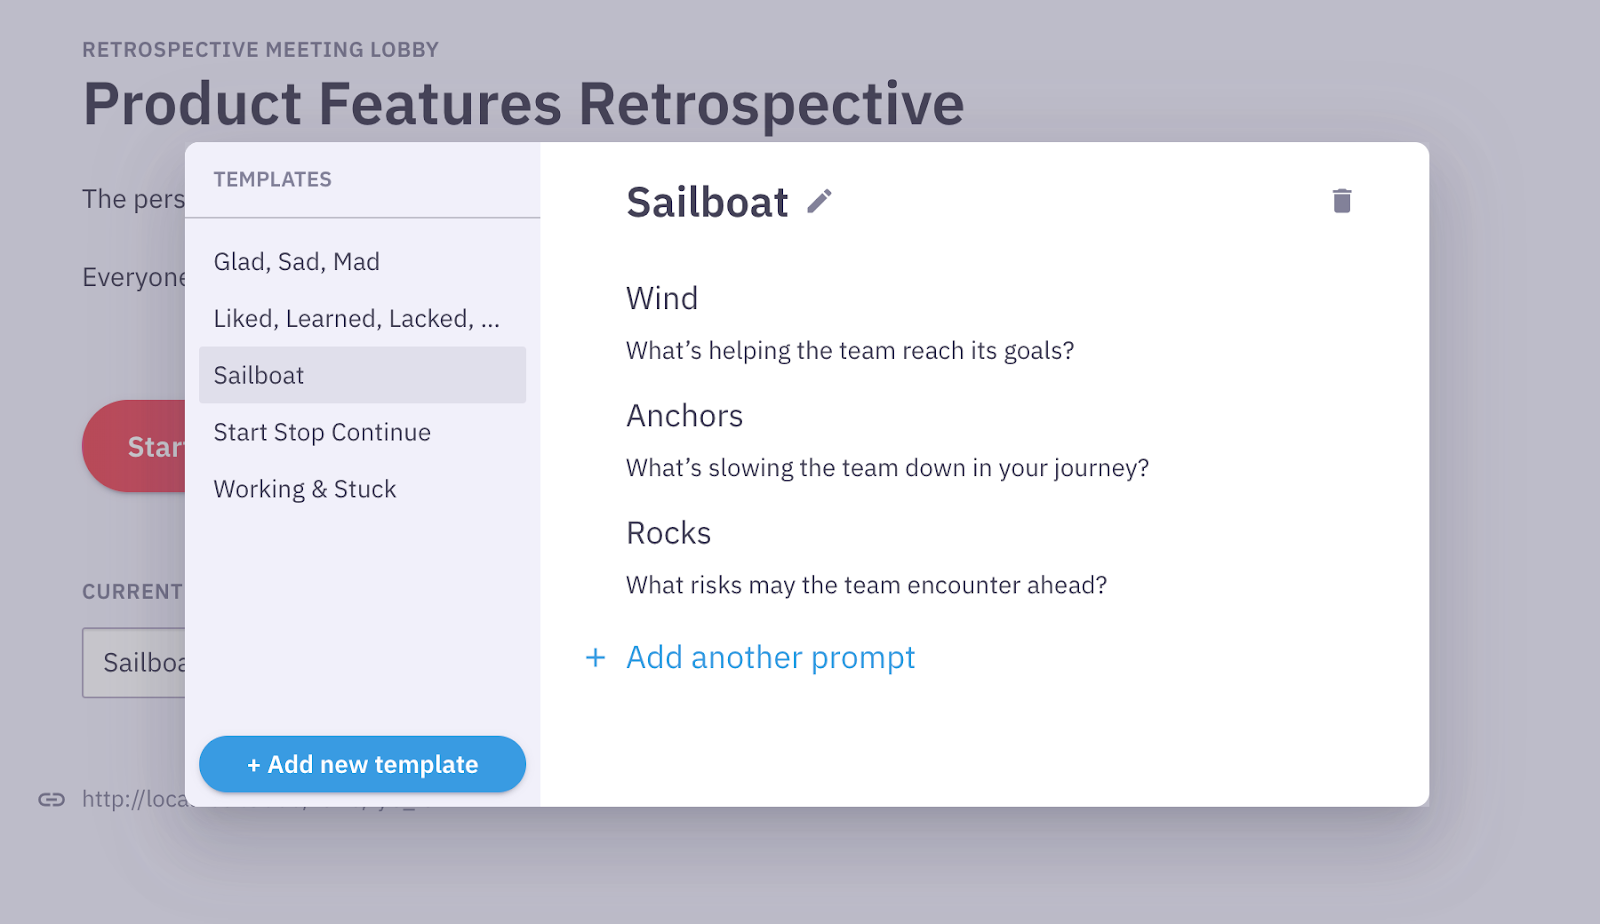 Choose from popular retrospective prompts or customize your own